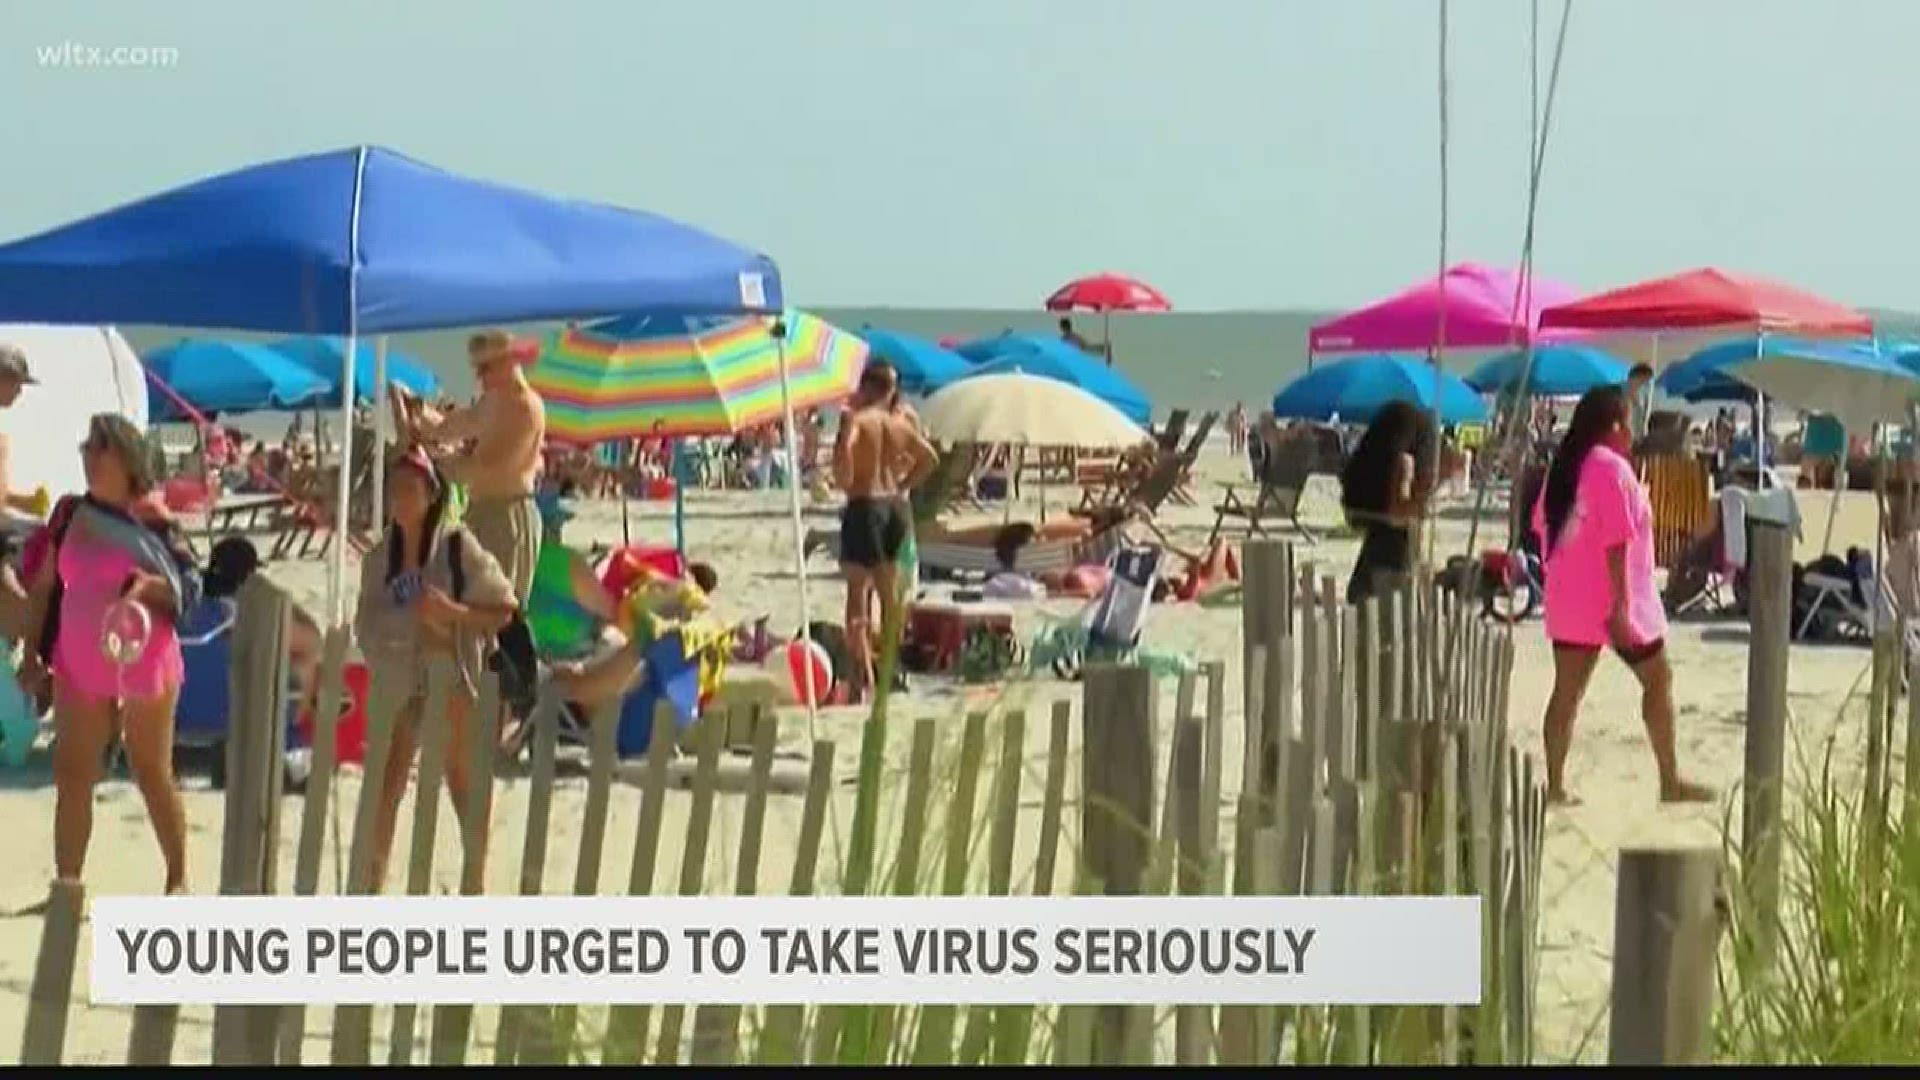 Hundreds gathered over the weekend in Clarendon county and more on the coast at beaches not social distancing or wearing masks